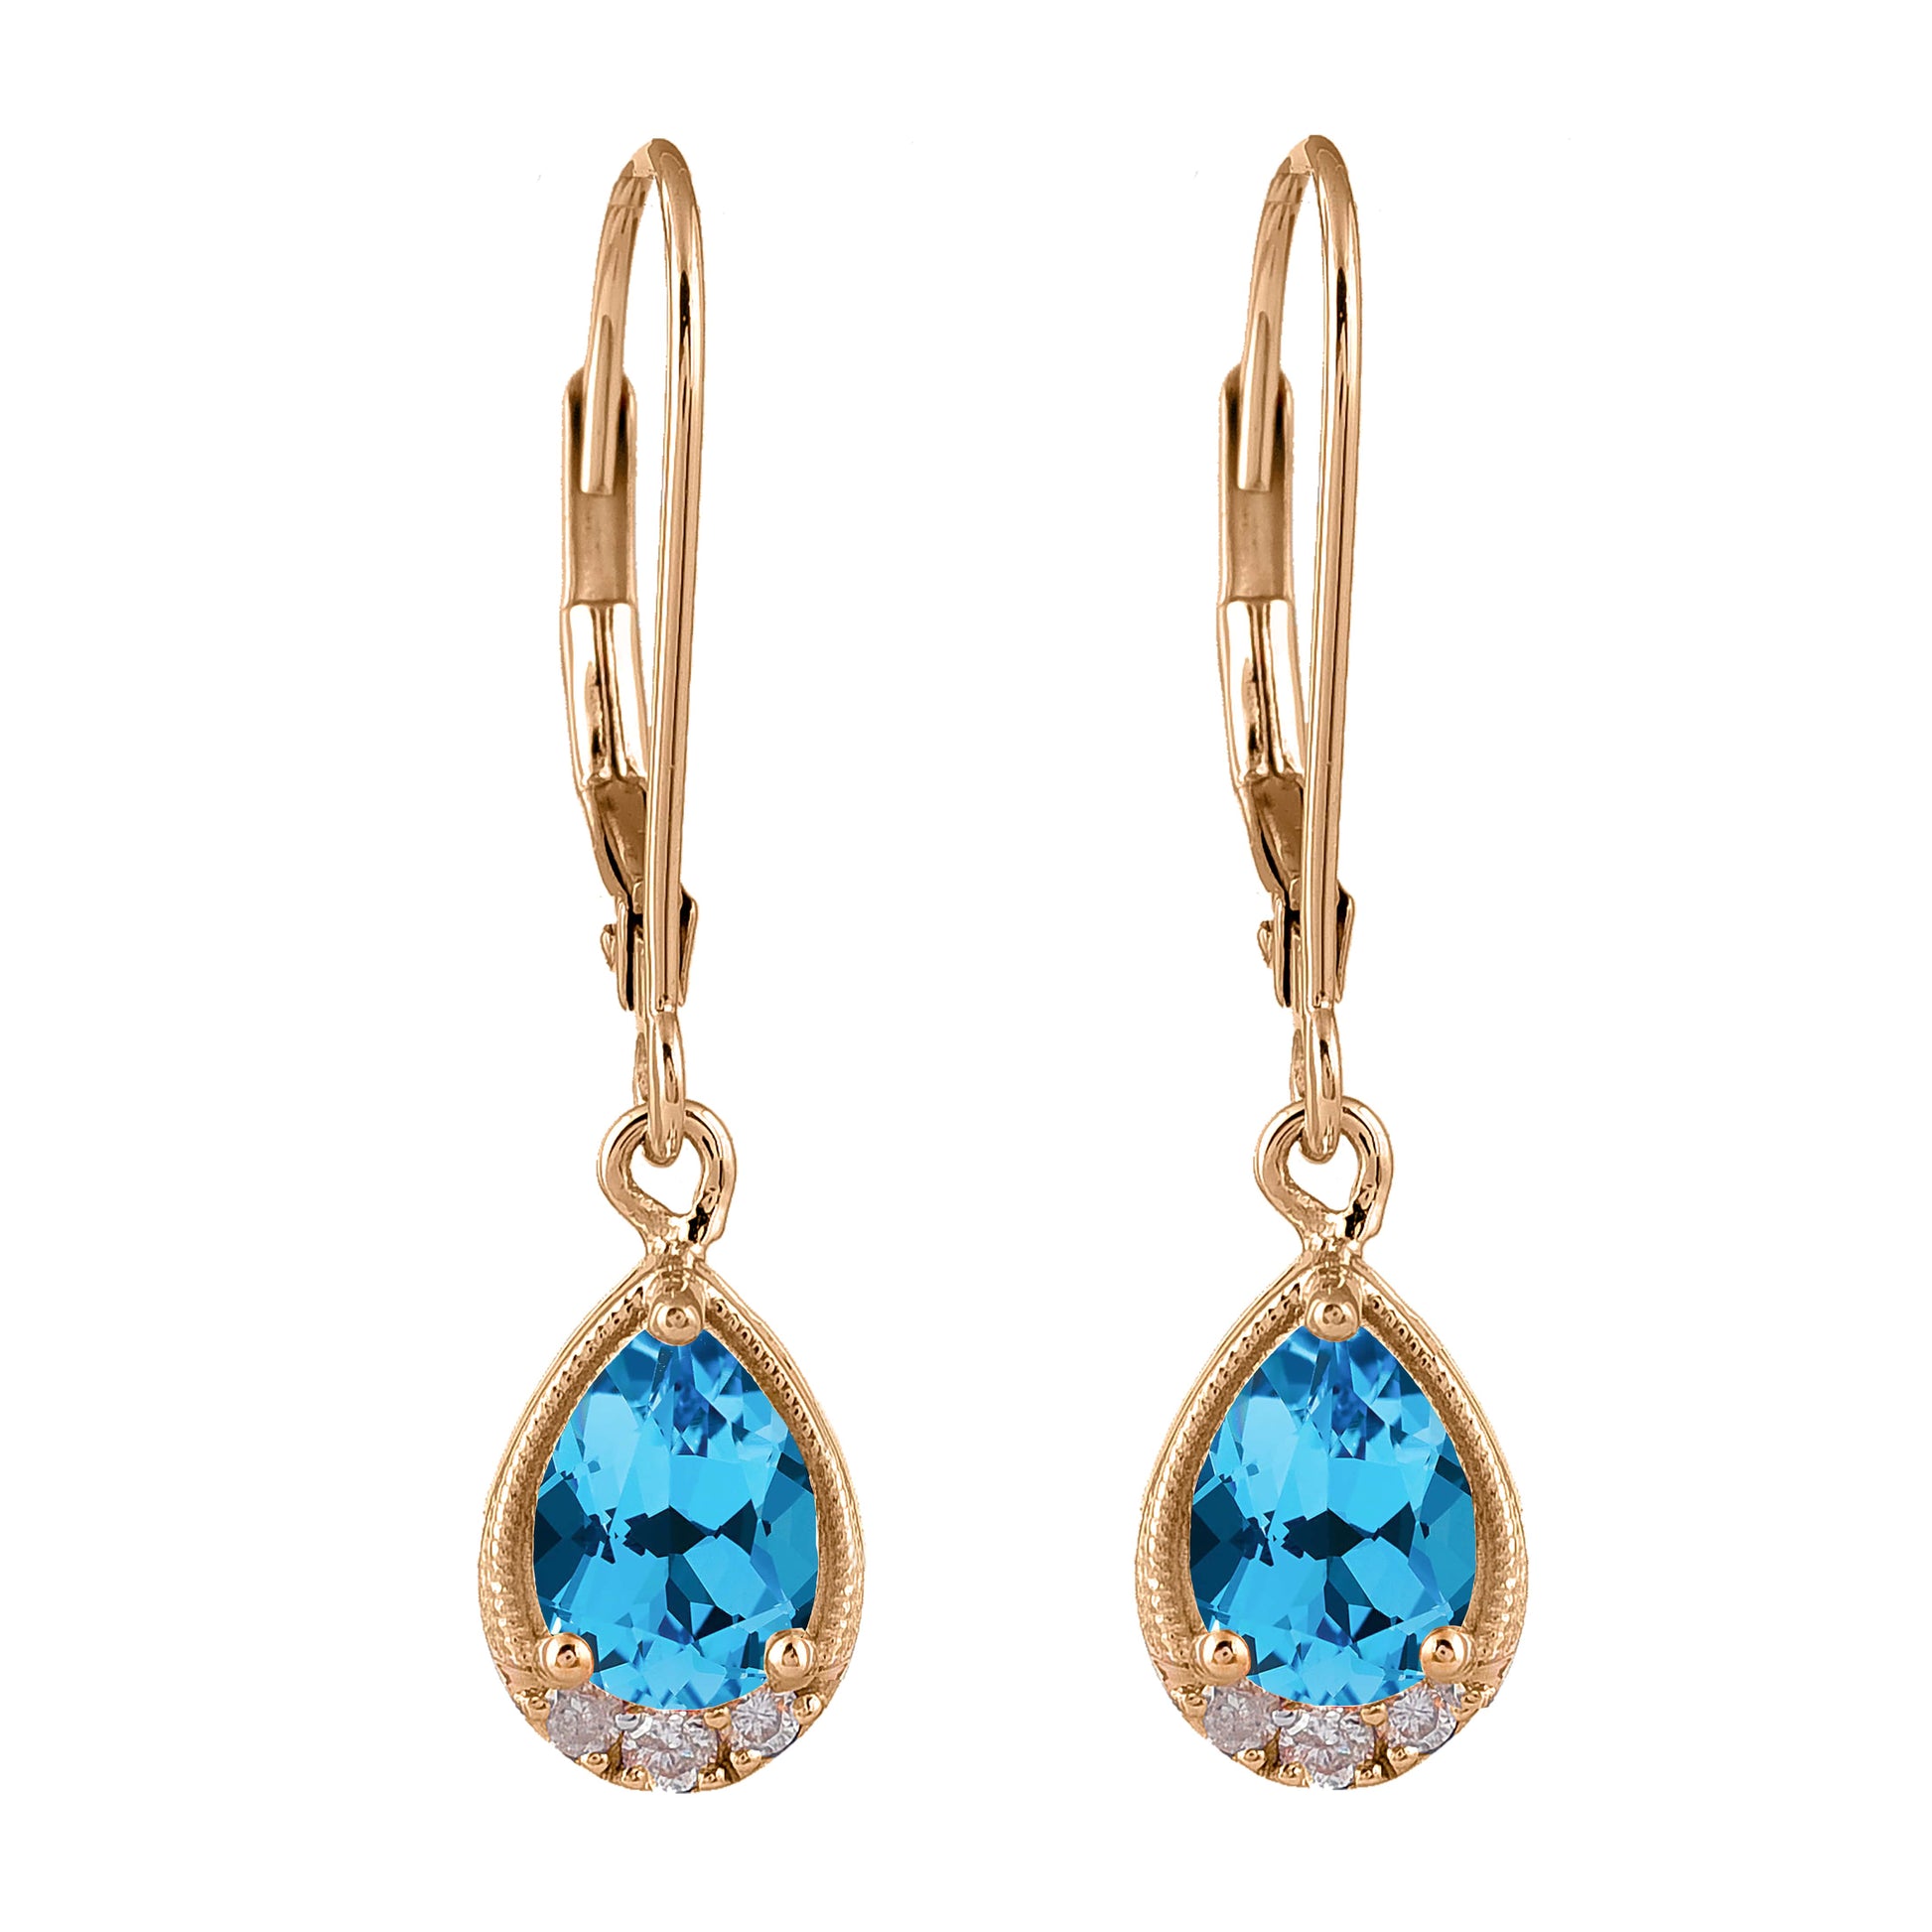 Luxurious lever-back earrings boasting blue topaz and diamond accents